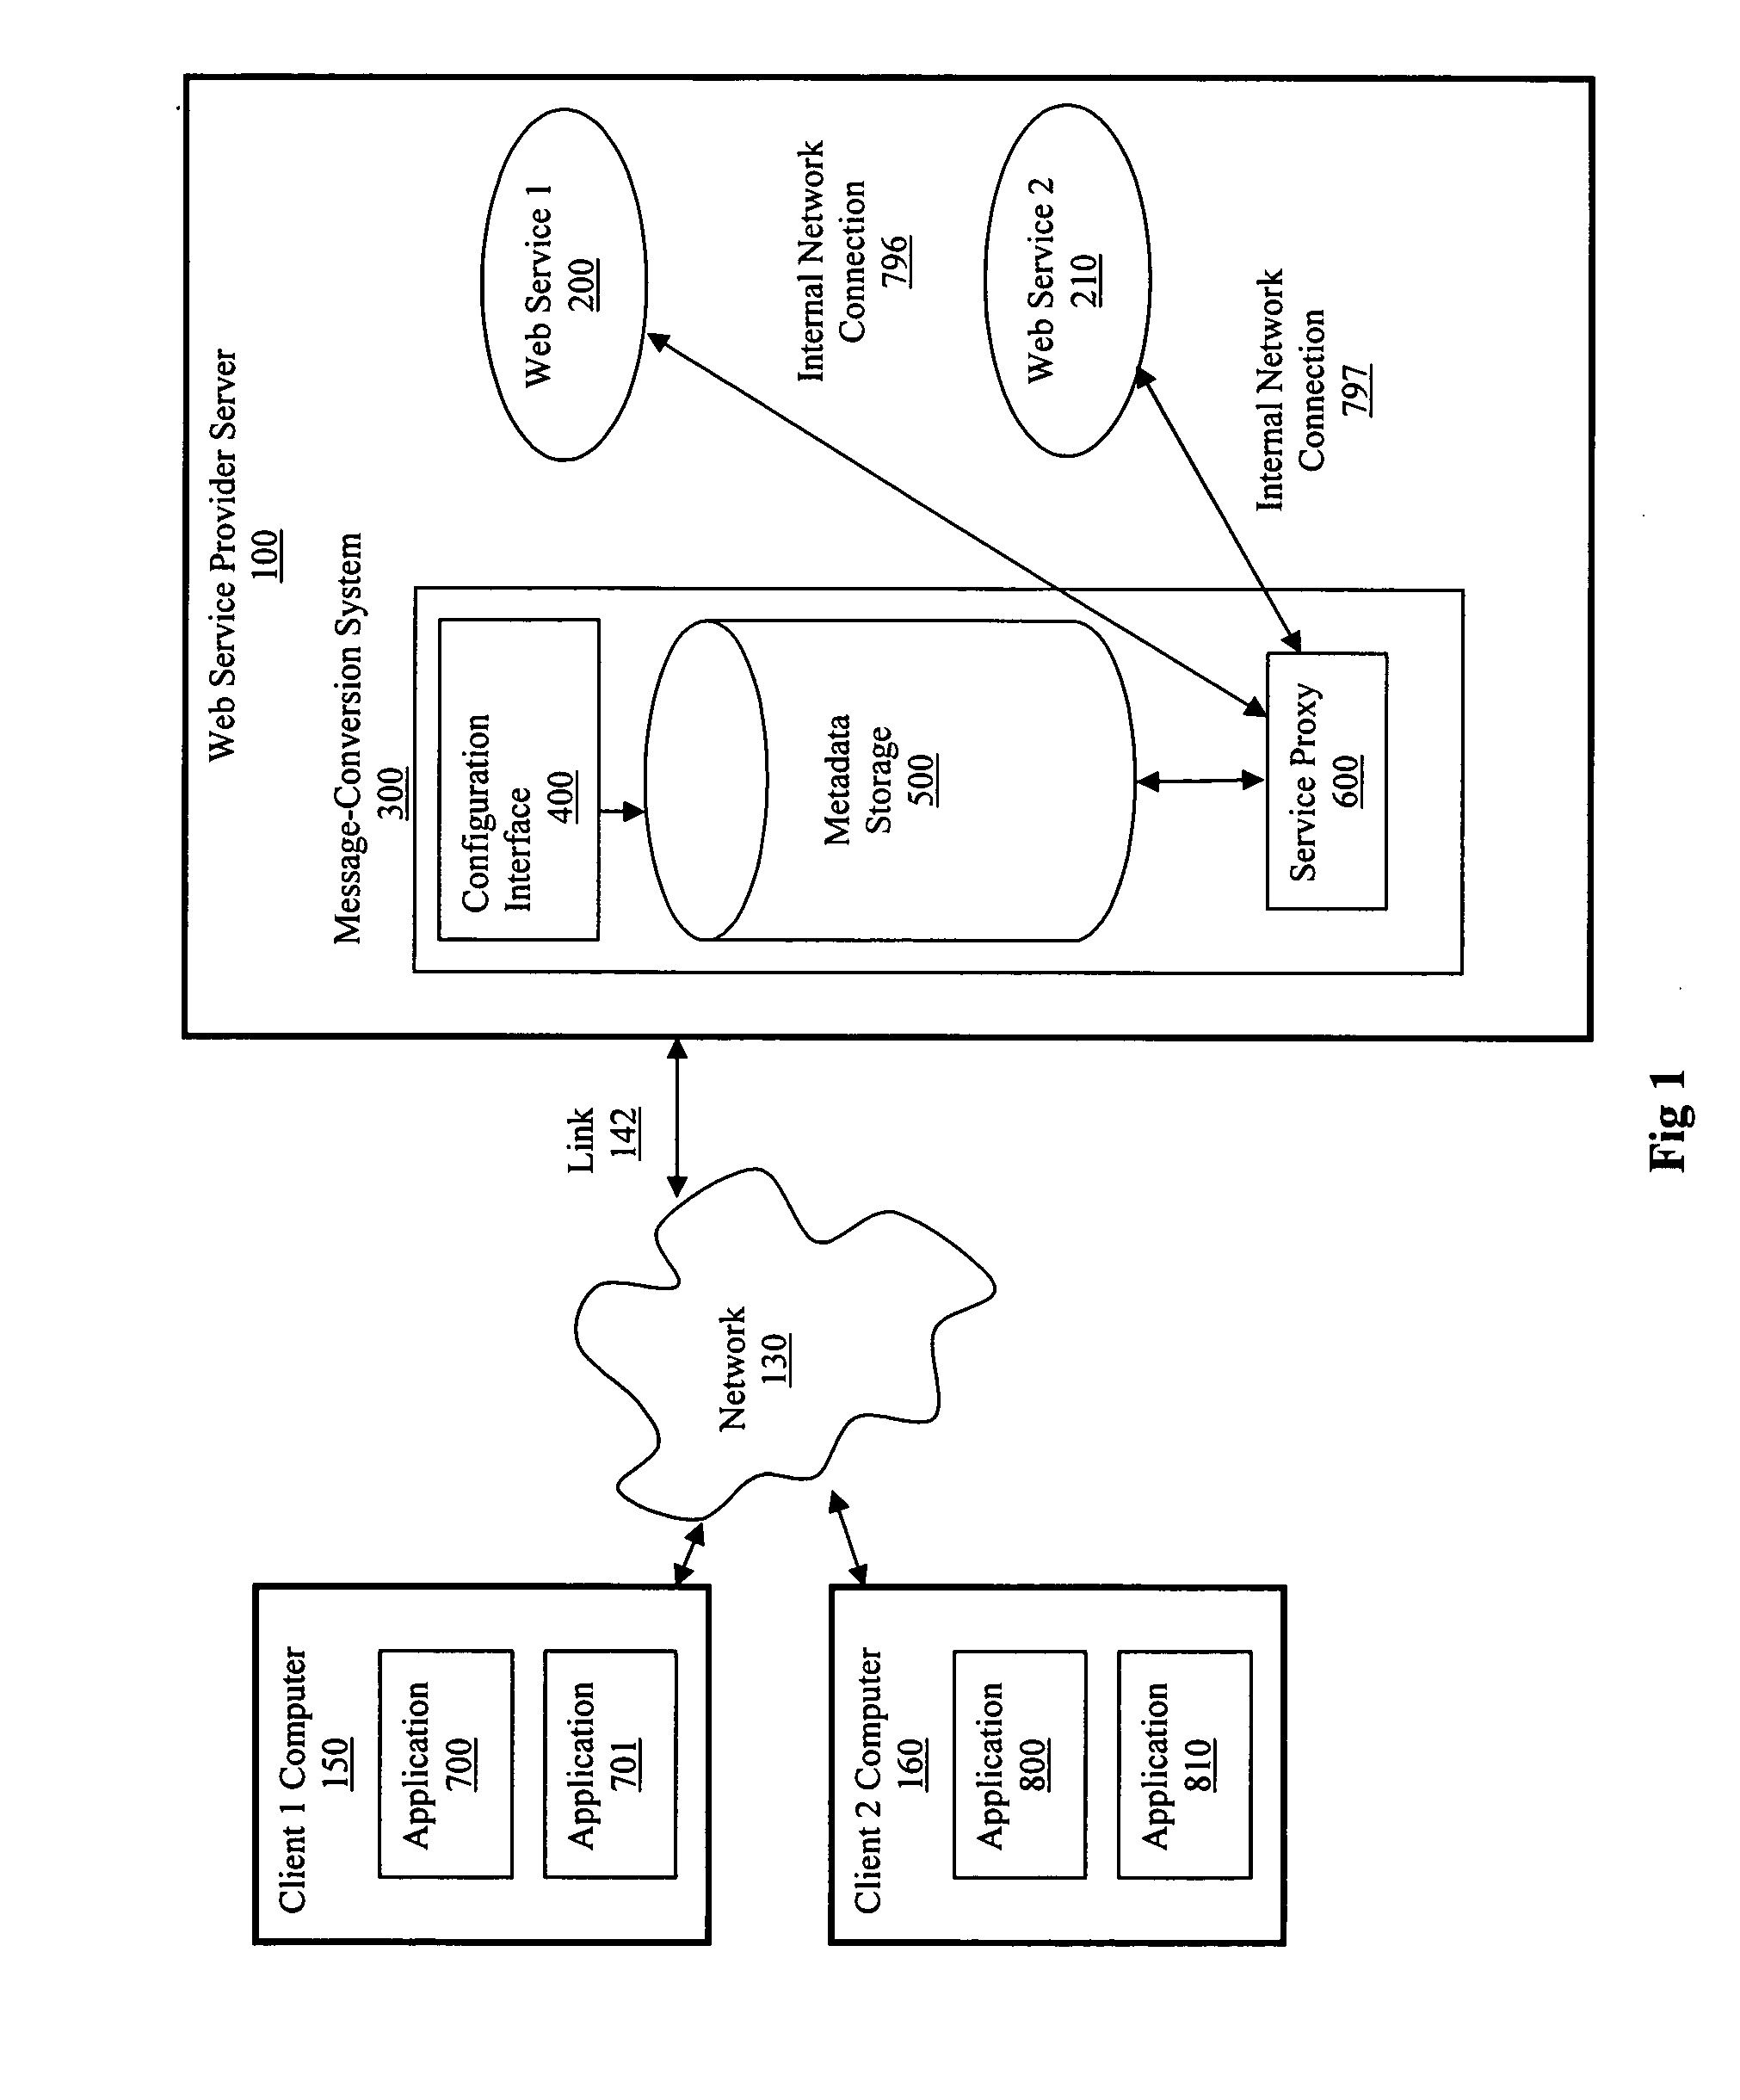 Method and apparatus for the use of dynamic XML message formats with web services